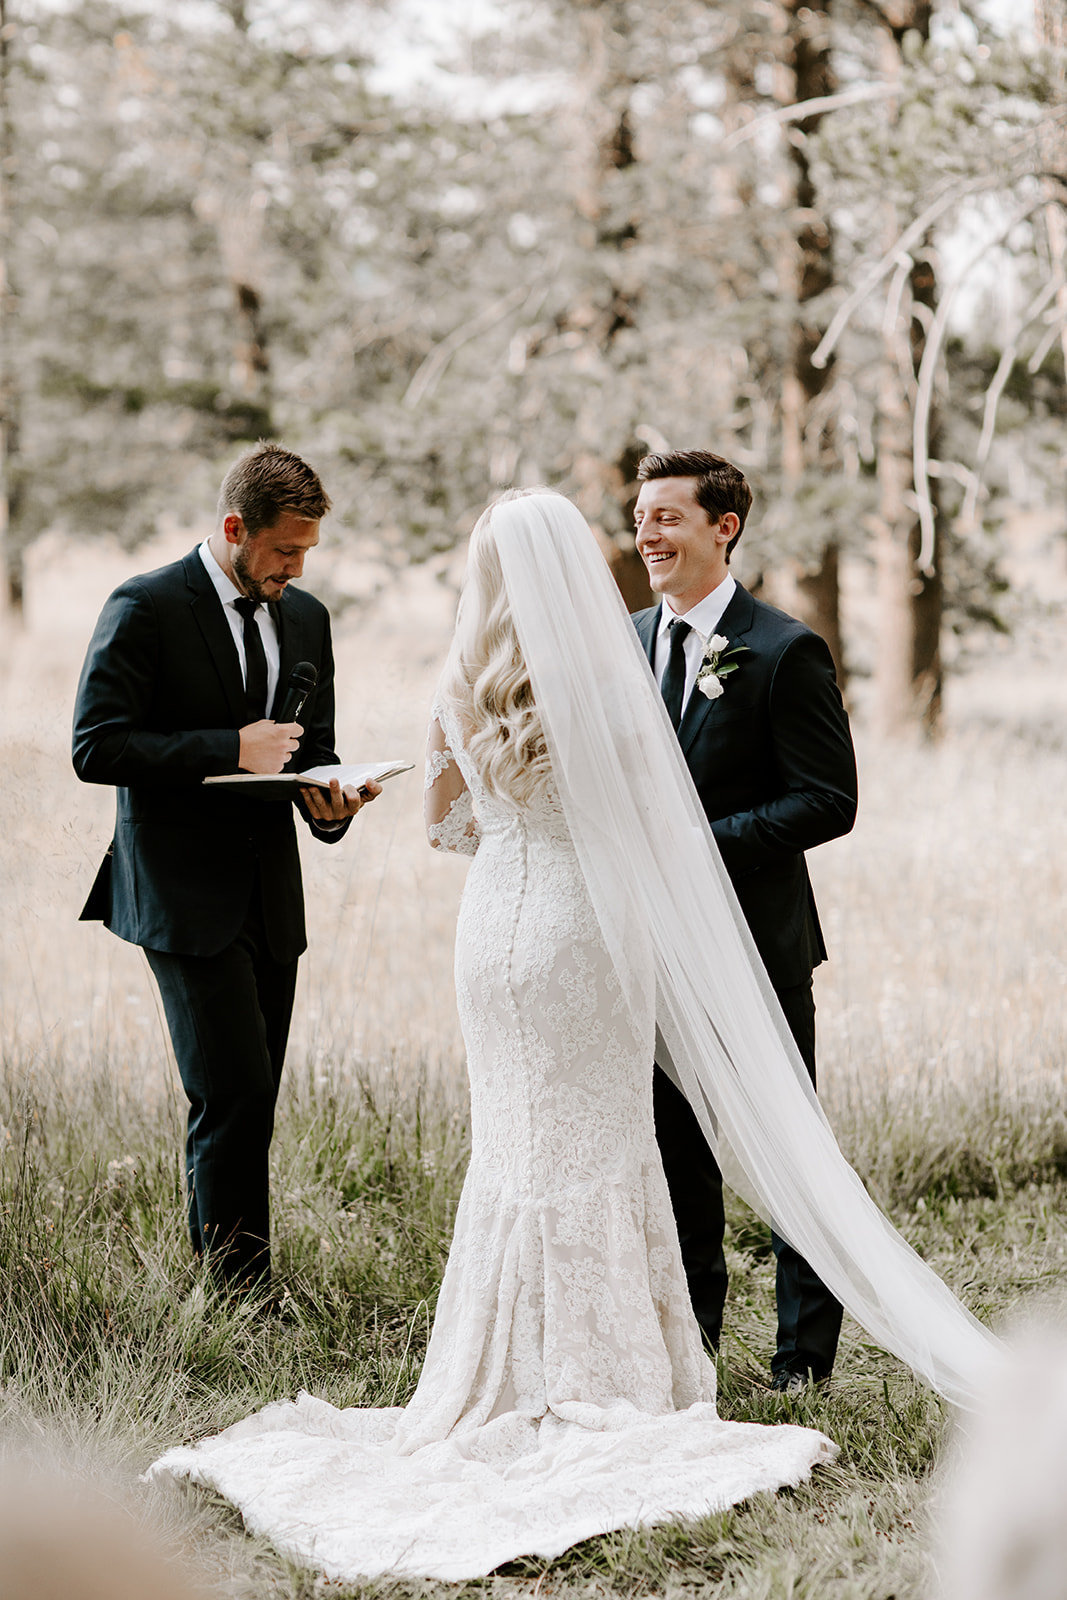 Truckee Wedding Planners couple saying vows in meadow at venue Mitchell's Mountain Meadows Sierraville near Truckee, Joy of Life Events image by The Shepard Photography